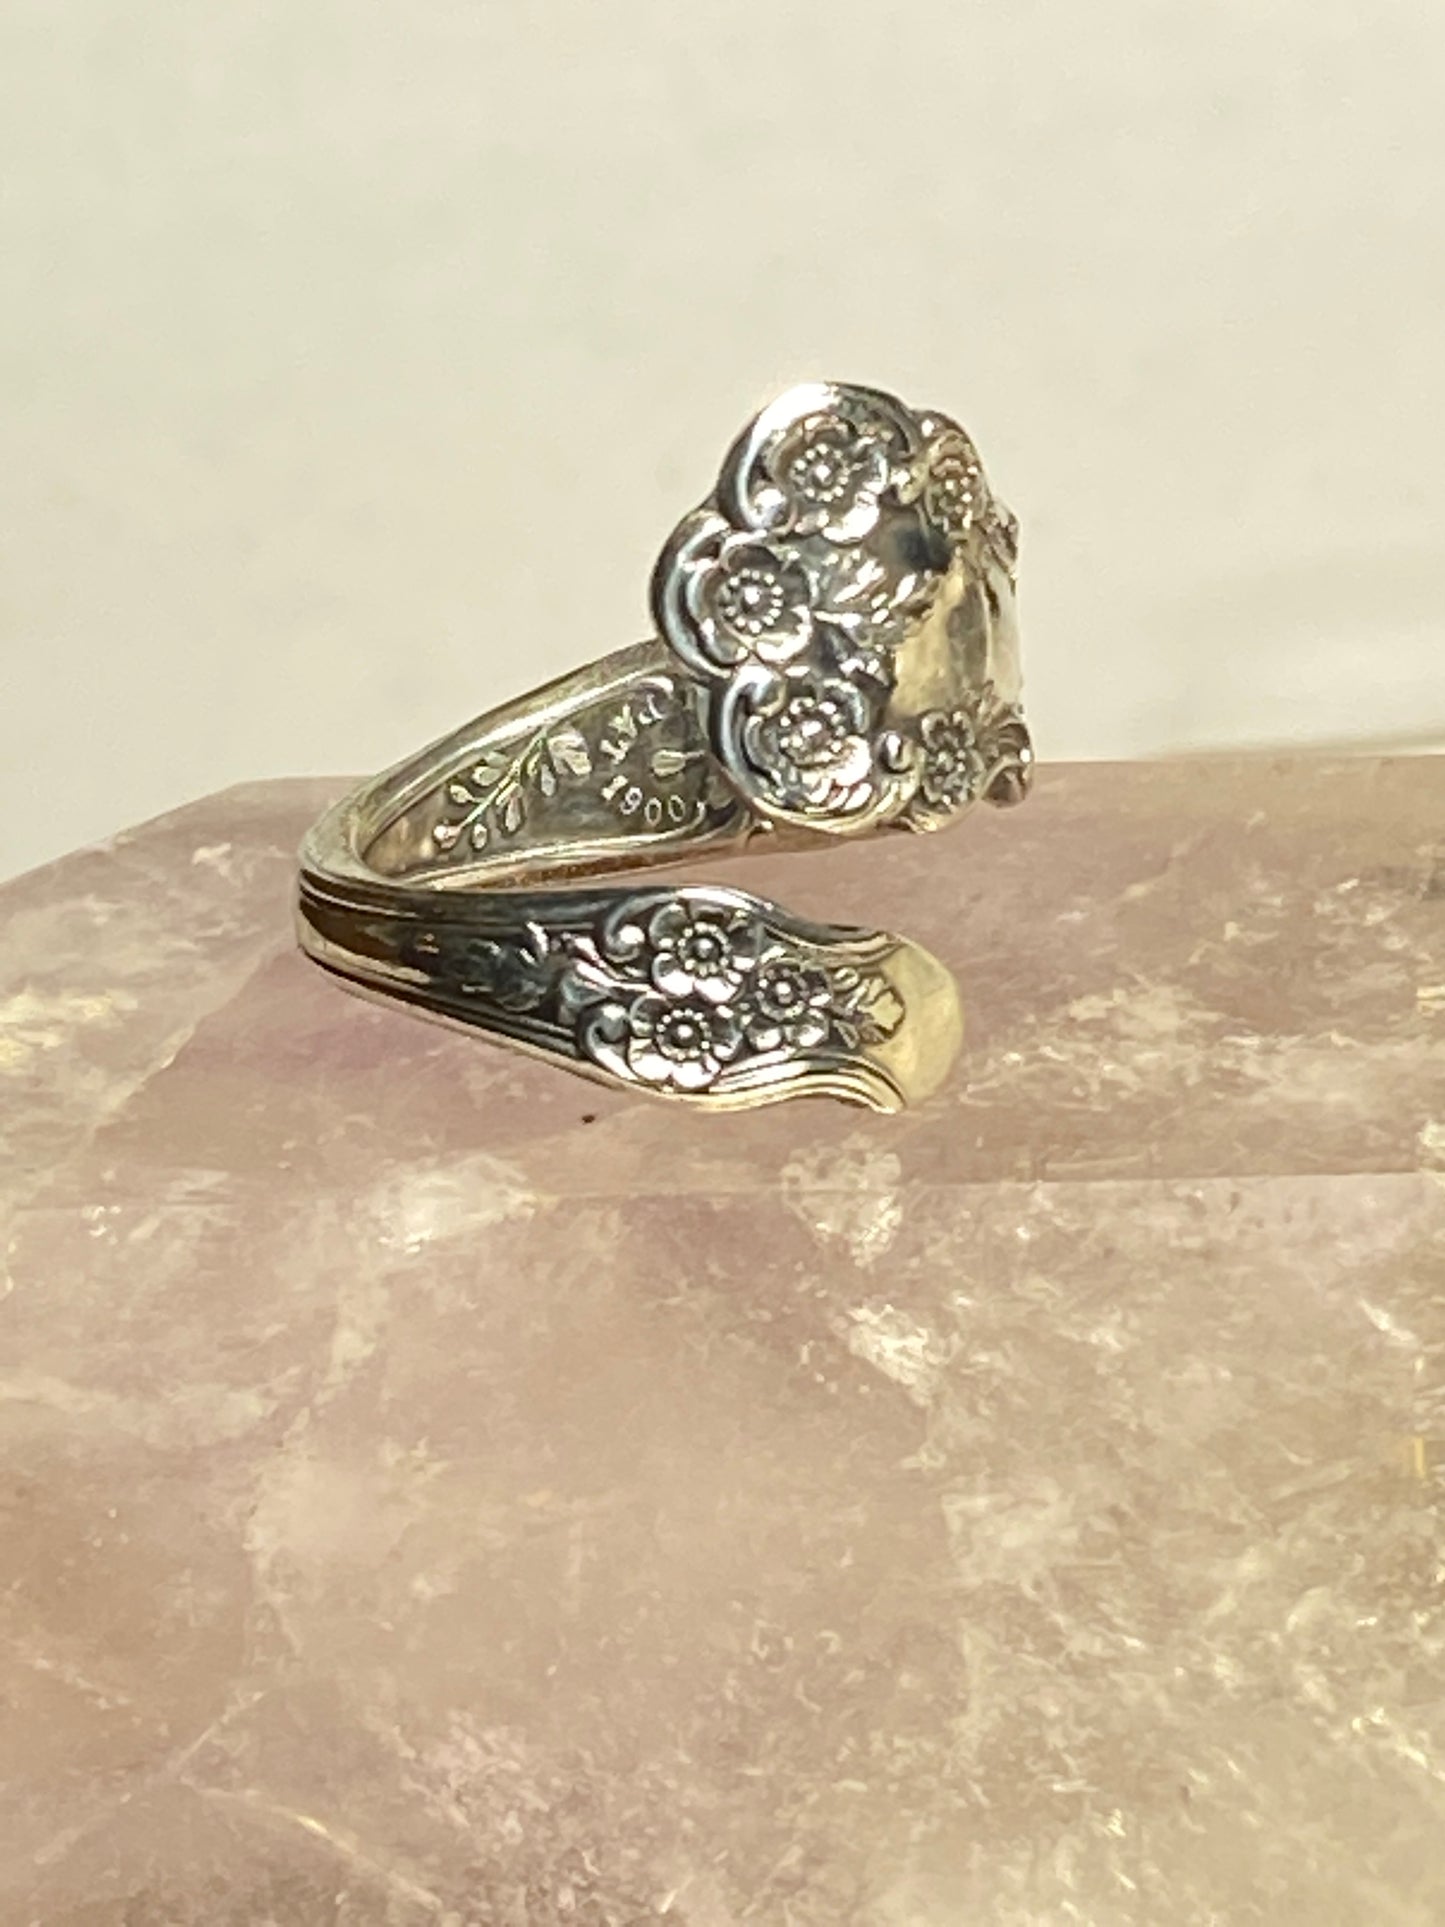 Flower spoon ring  floral band  sterling silver women girls